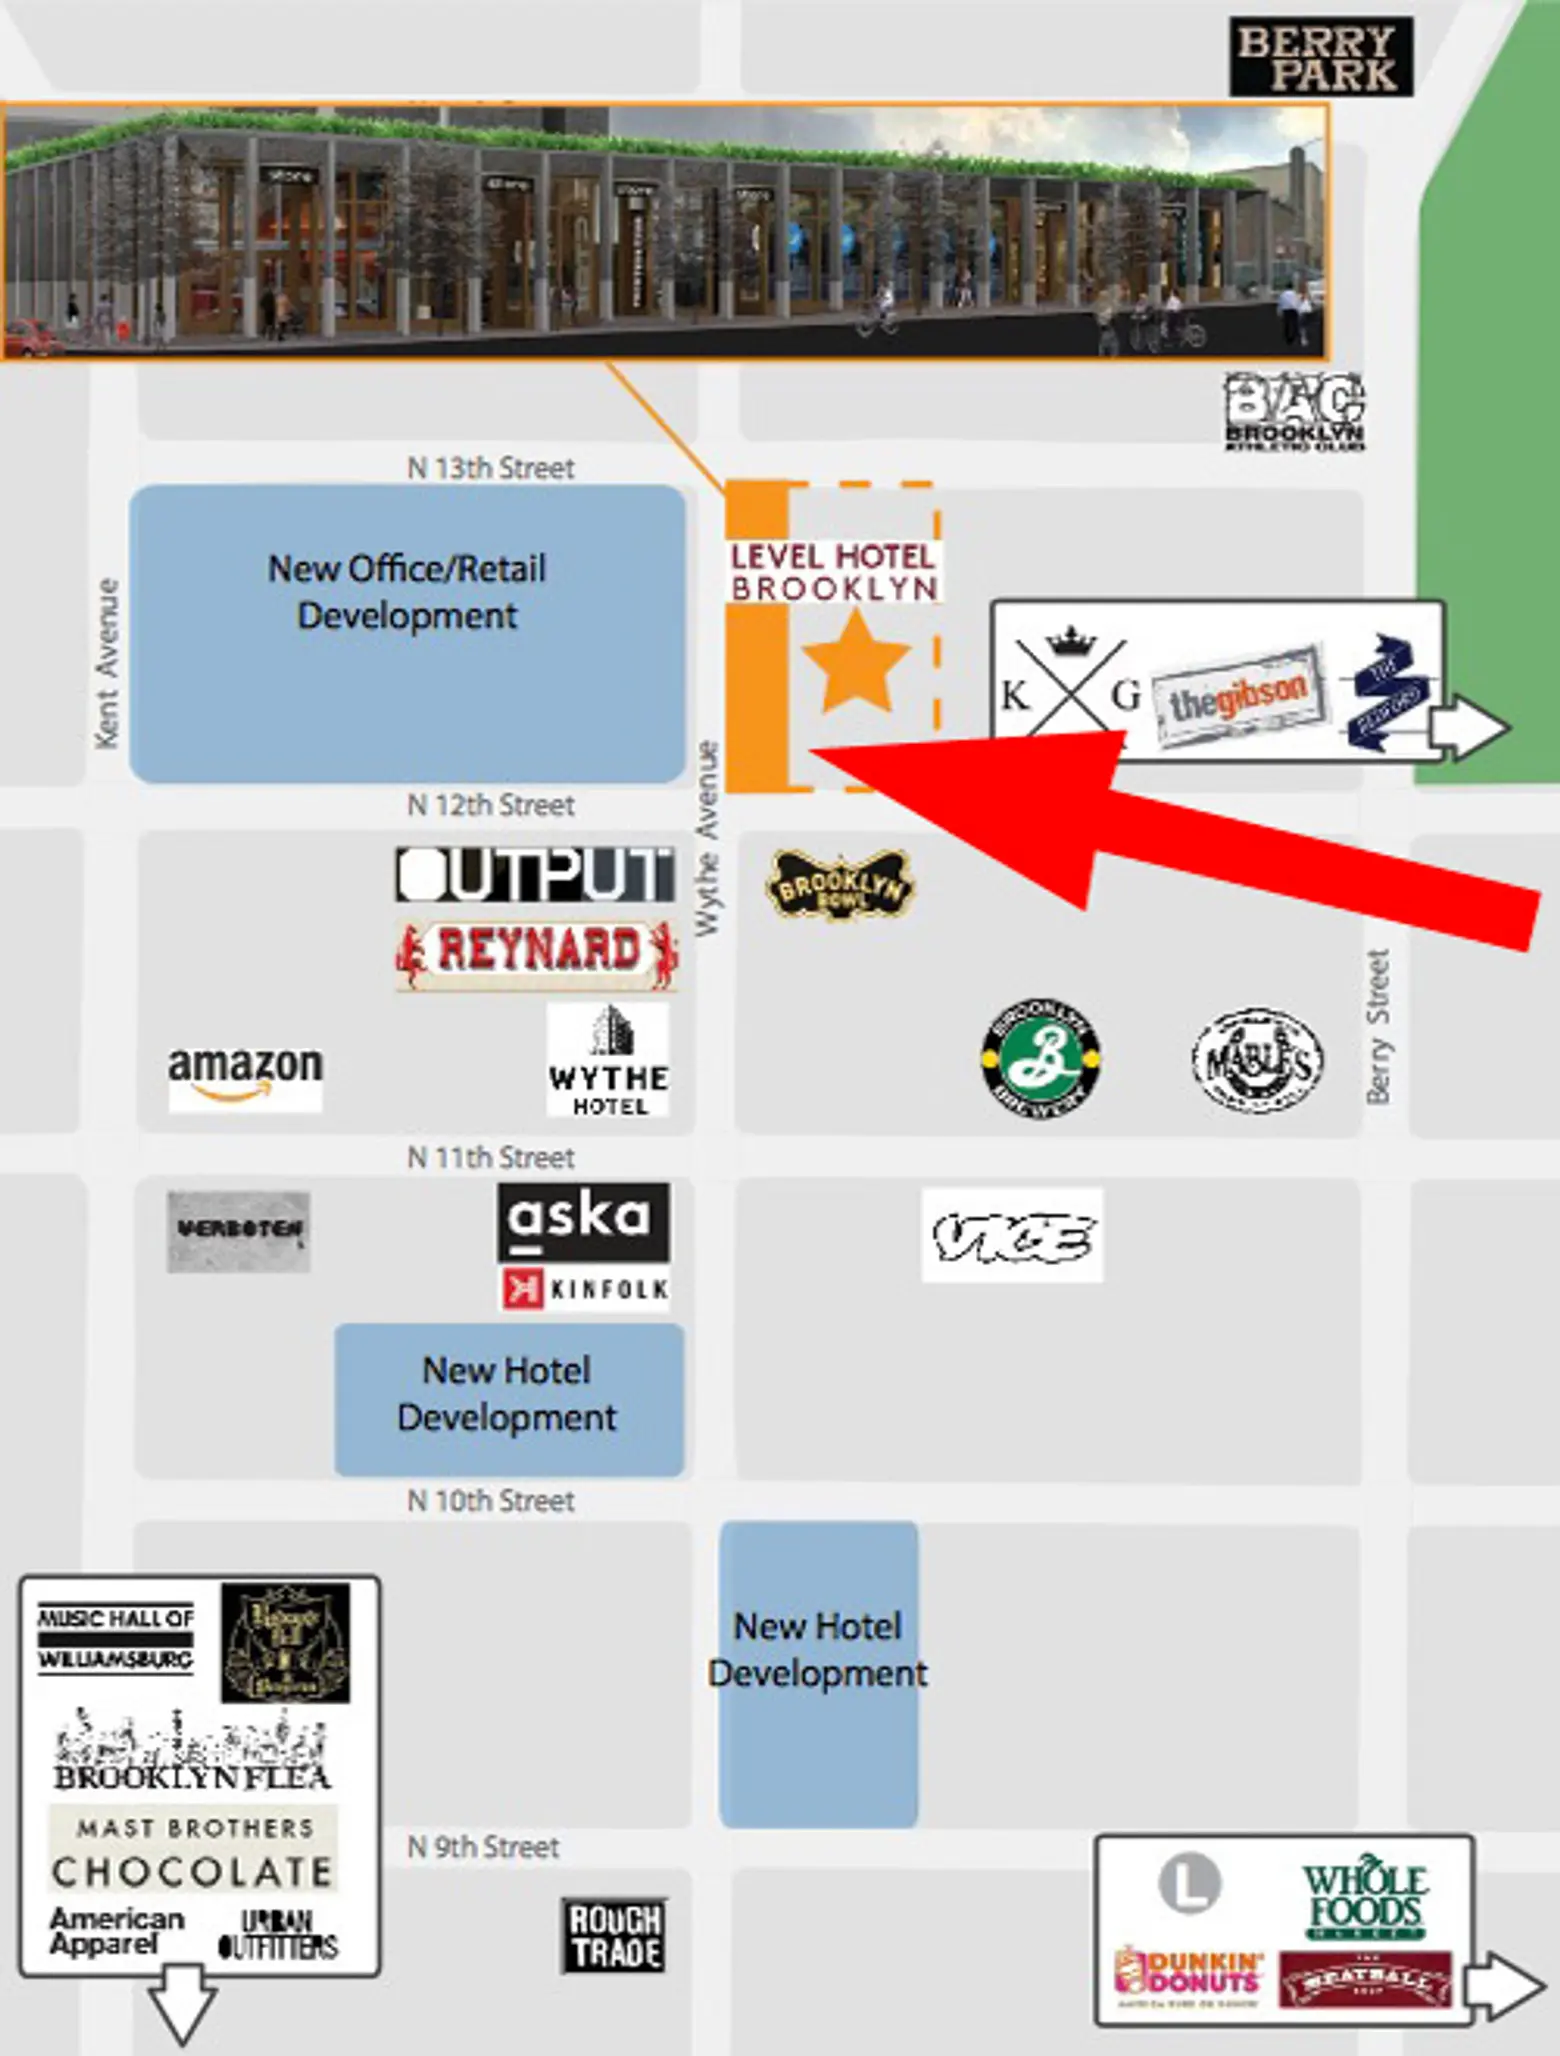 A promotional flyer on the Shopping Center Group's website for the Level Hotel